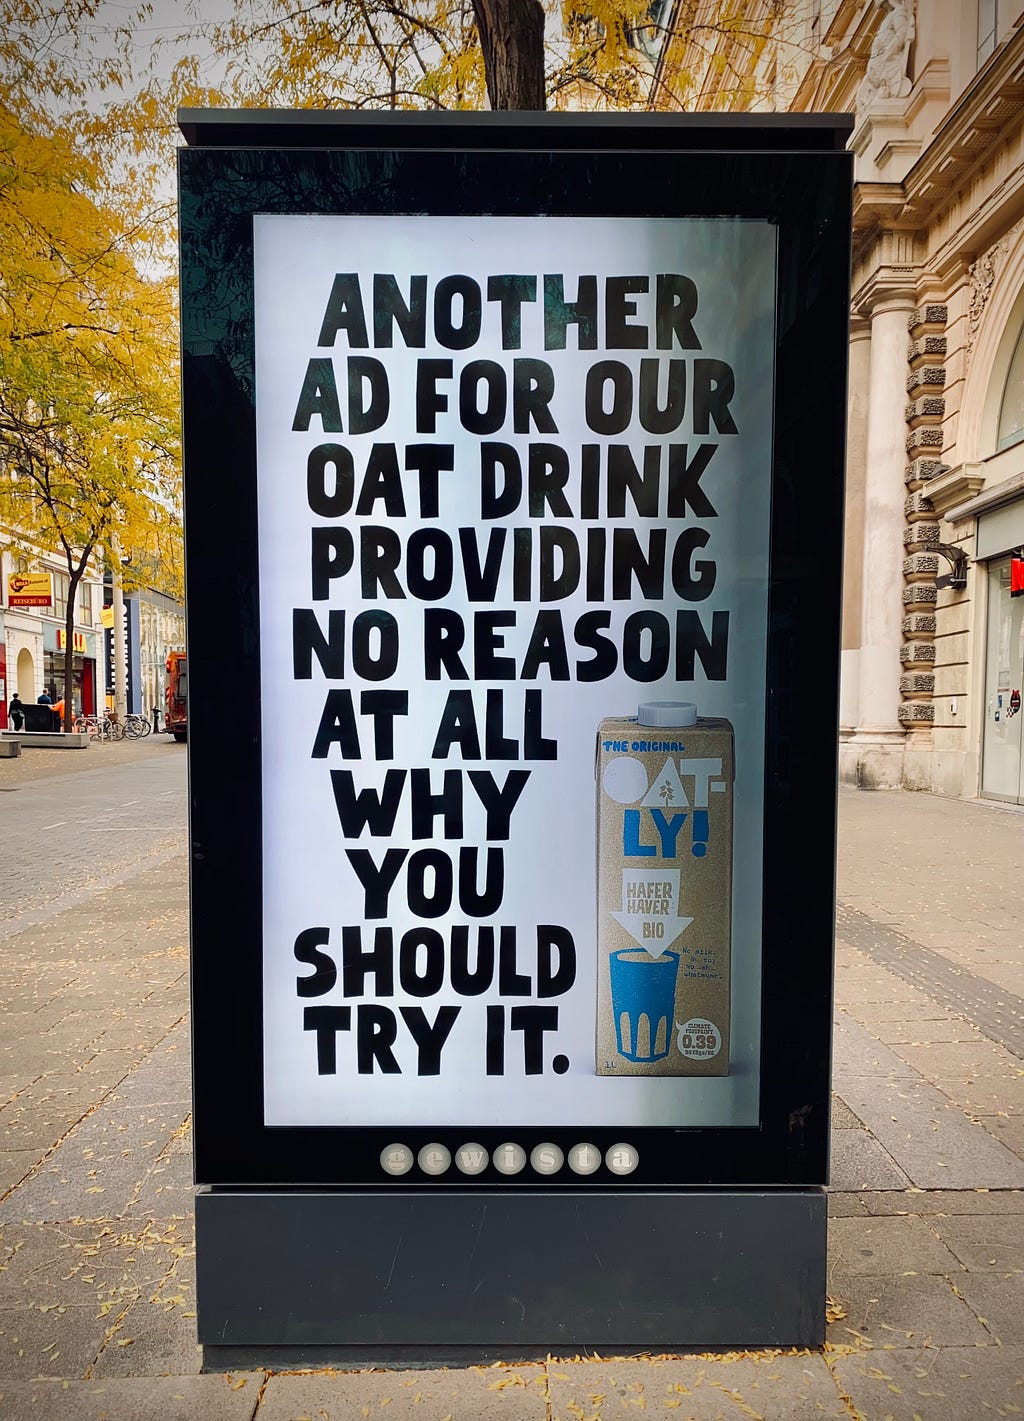 An advertisement from Oatly on a bus stop, saying “Another ad for our oat drink providing no reason at all why you should try it”